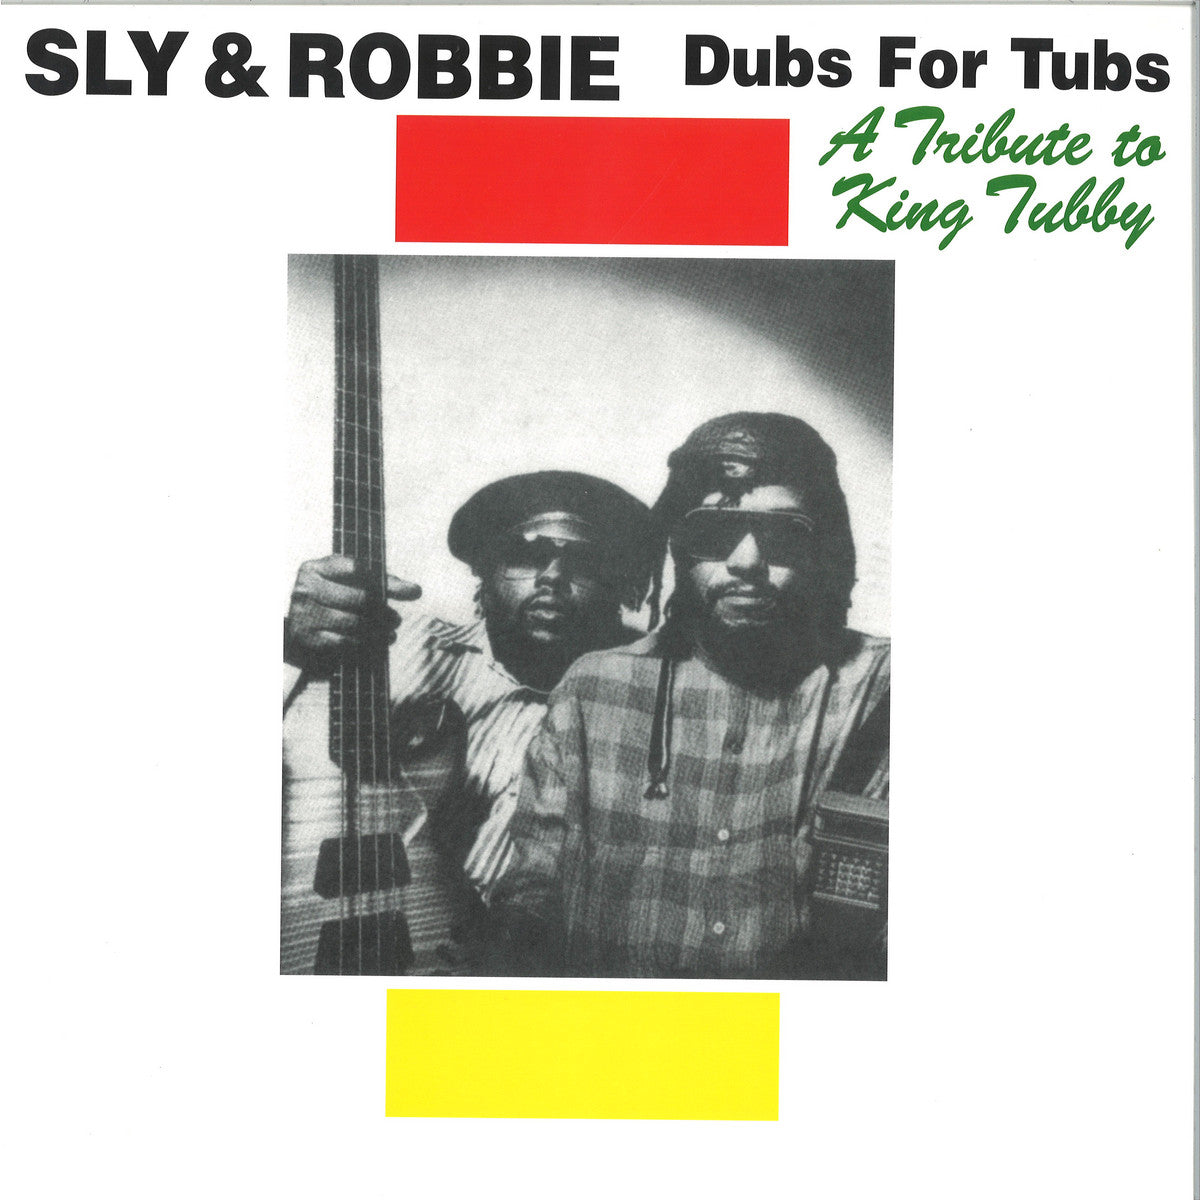 Sly & Robbie - Dubs for Tubs: A Tribute to King Tubby LP